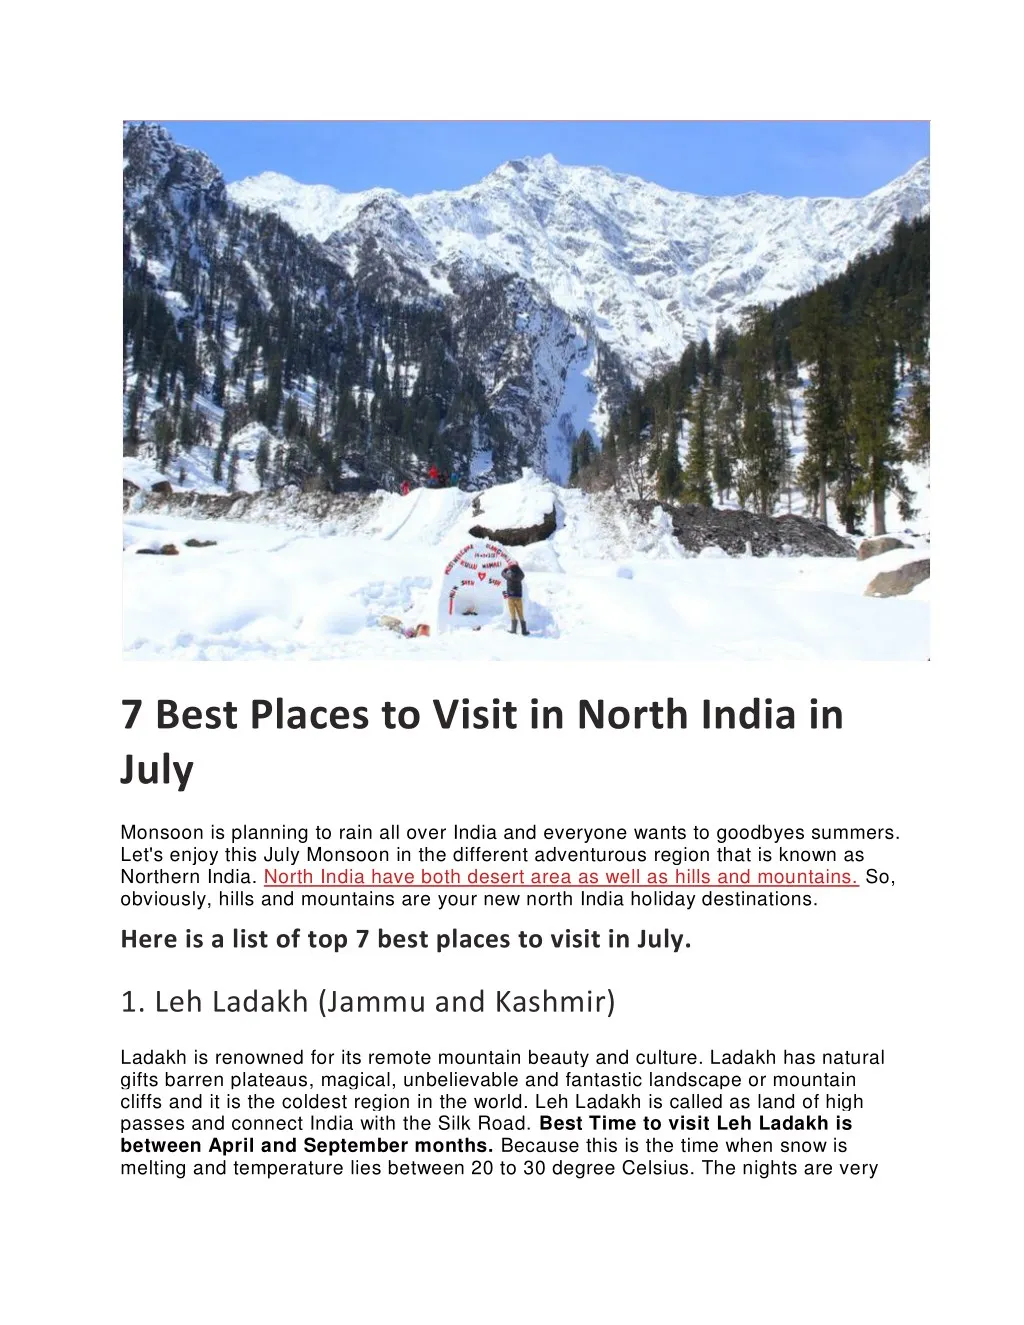 7 best places to visit in north india in july